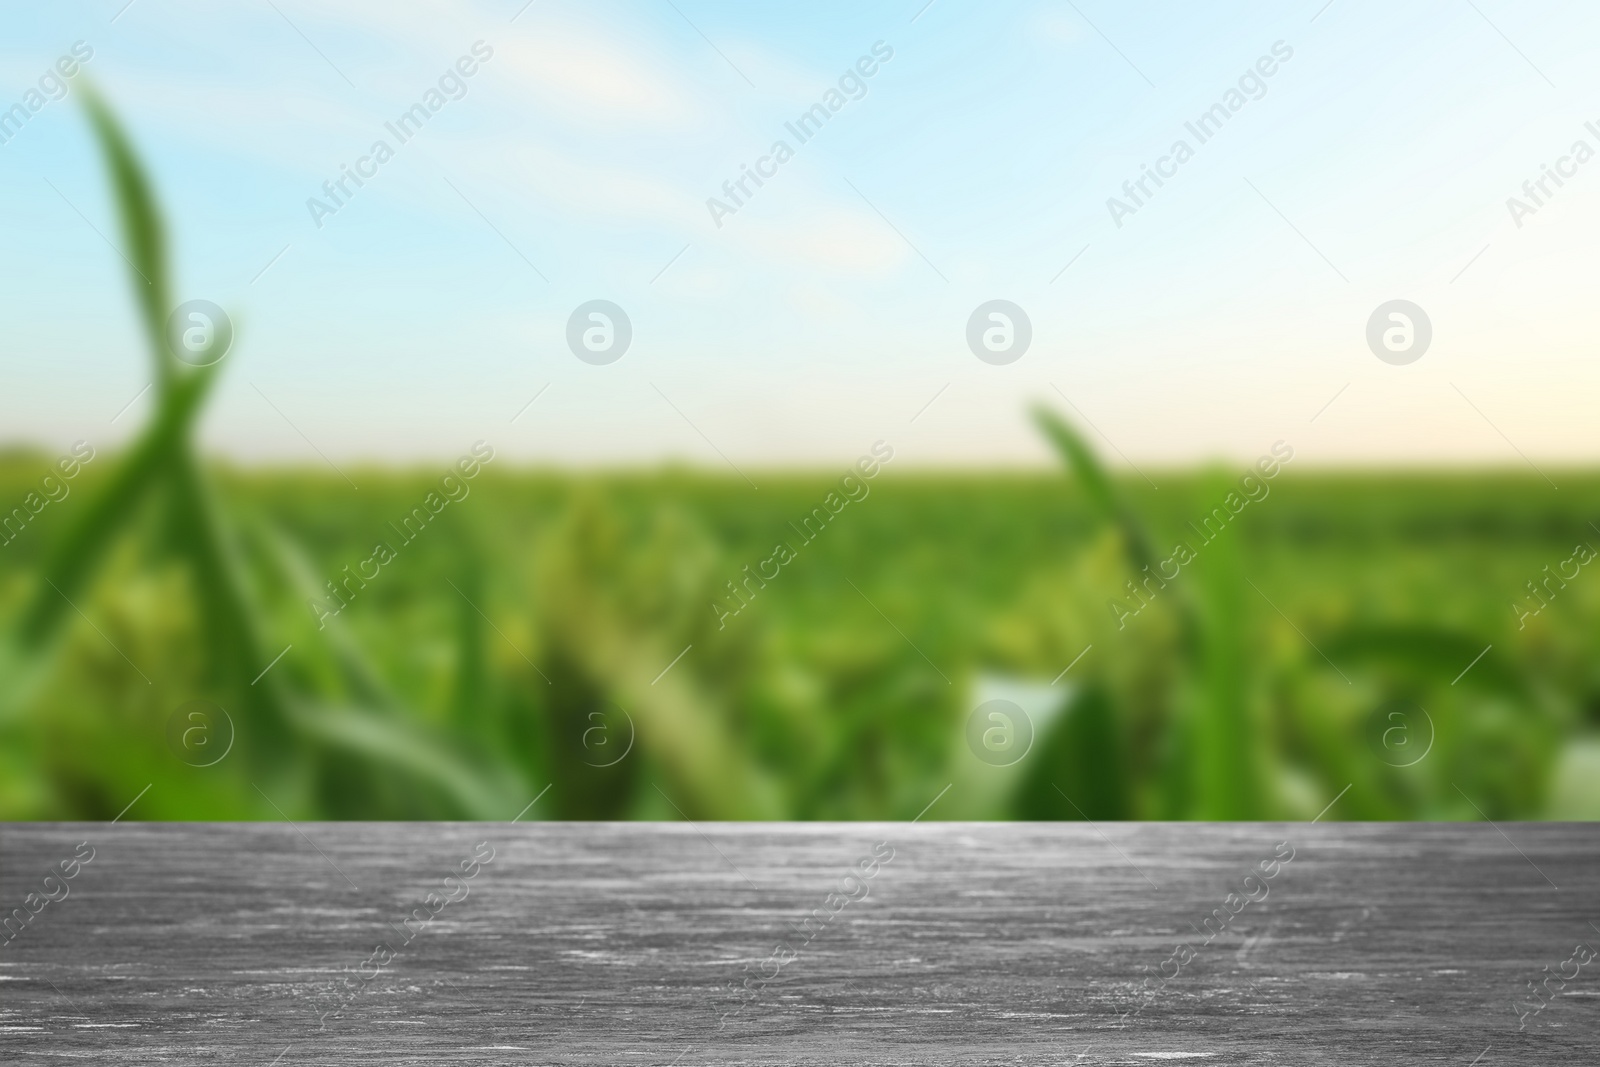 Image of Empty grey stone surface and blurred view of corn plants growing on field. Space for text